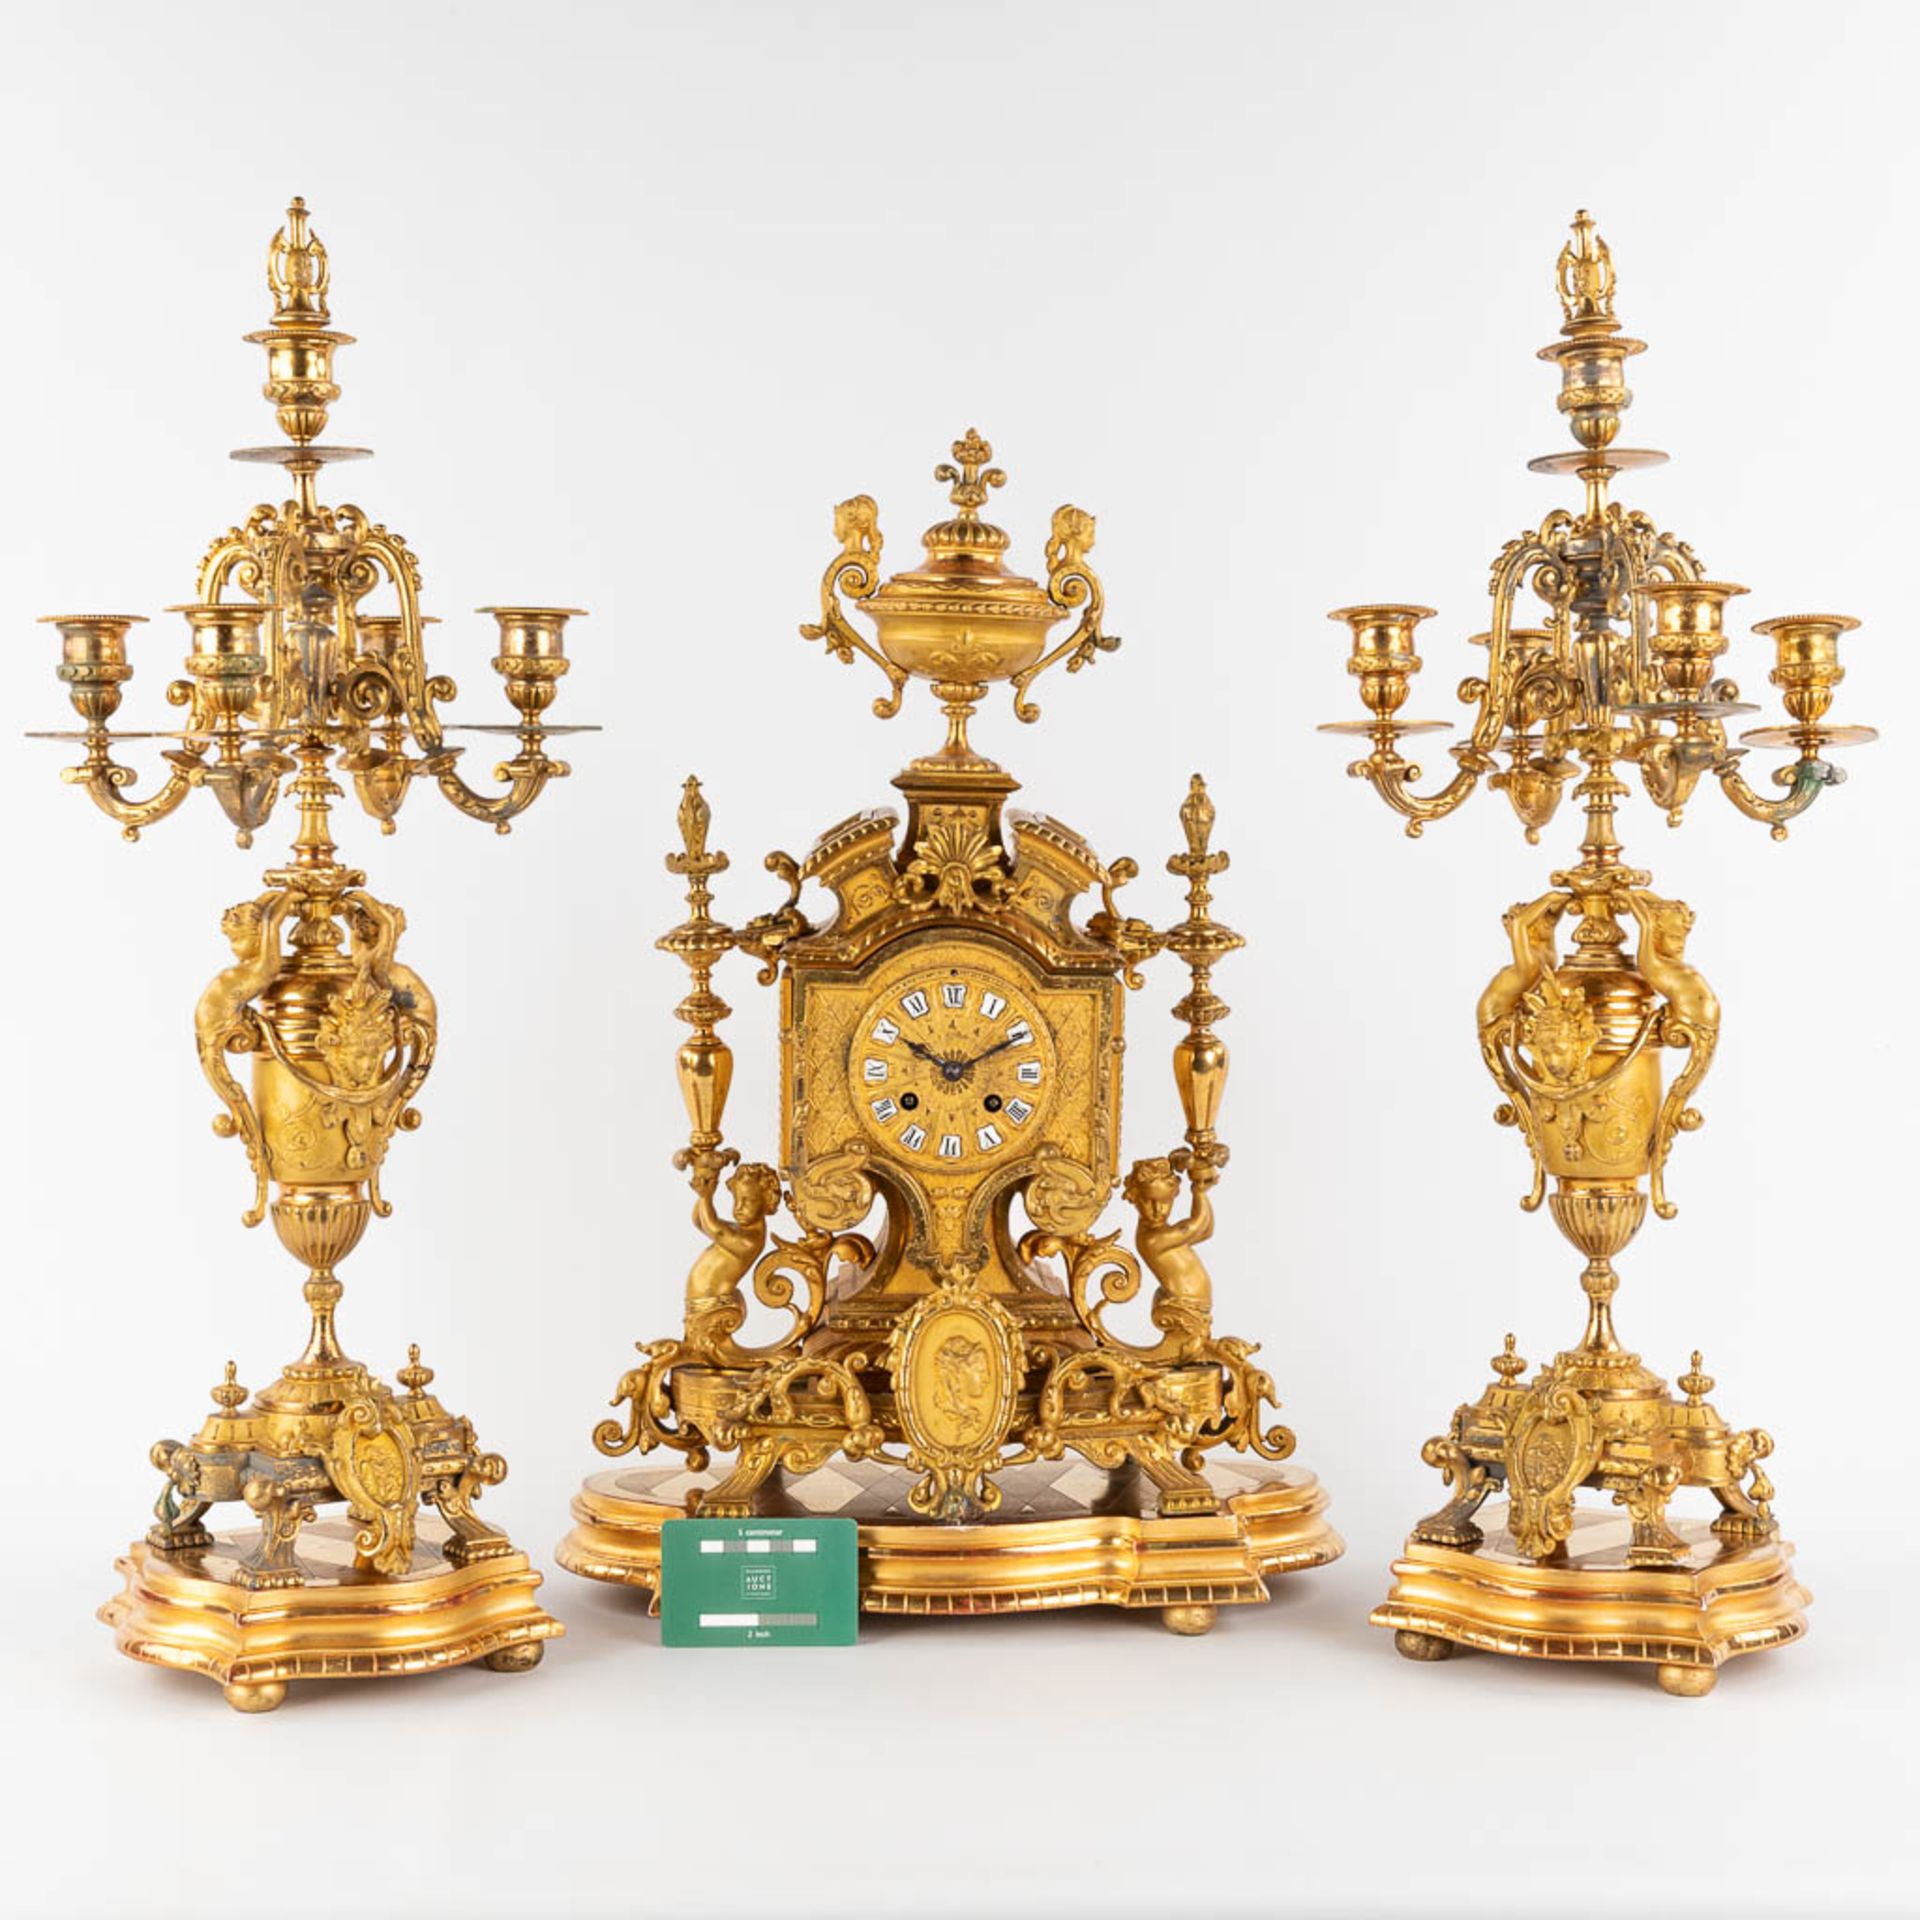 A three-piece mantle garniture clock and candelabra, gilt spelter, decorated with putti. Circa 1900. - Image 2 of 19